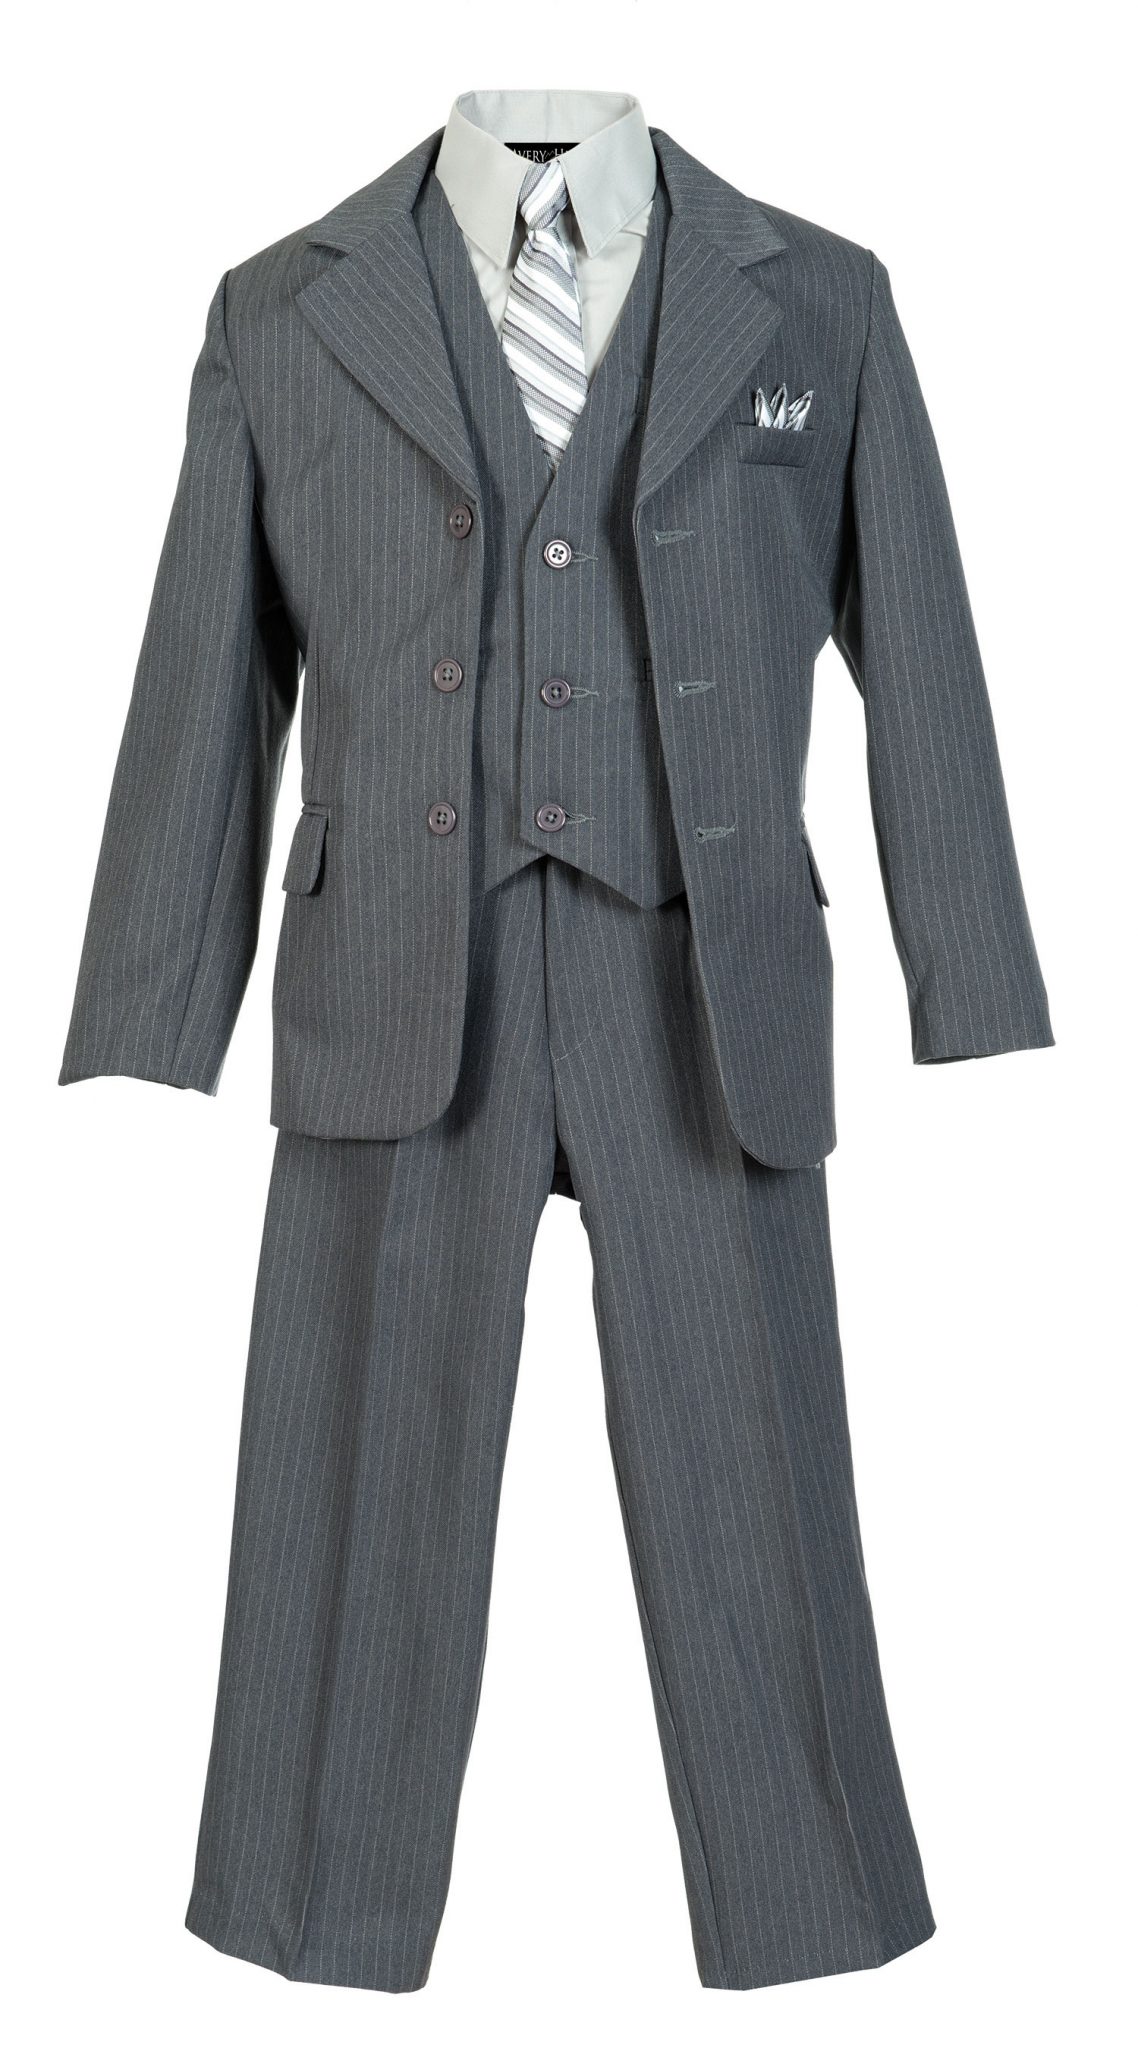 Boys Pinstripe Suit Set with Matching Tie LTGY 5